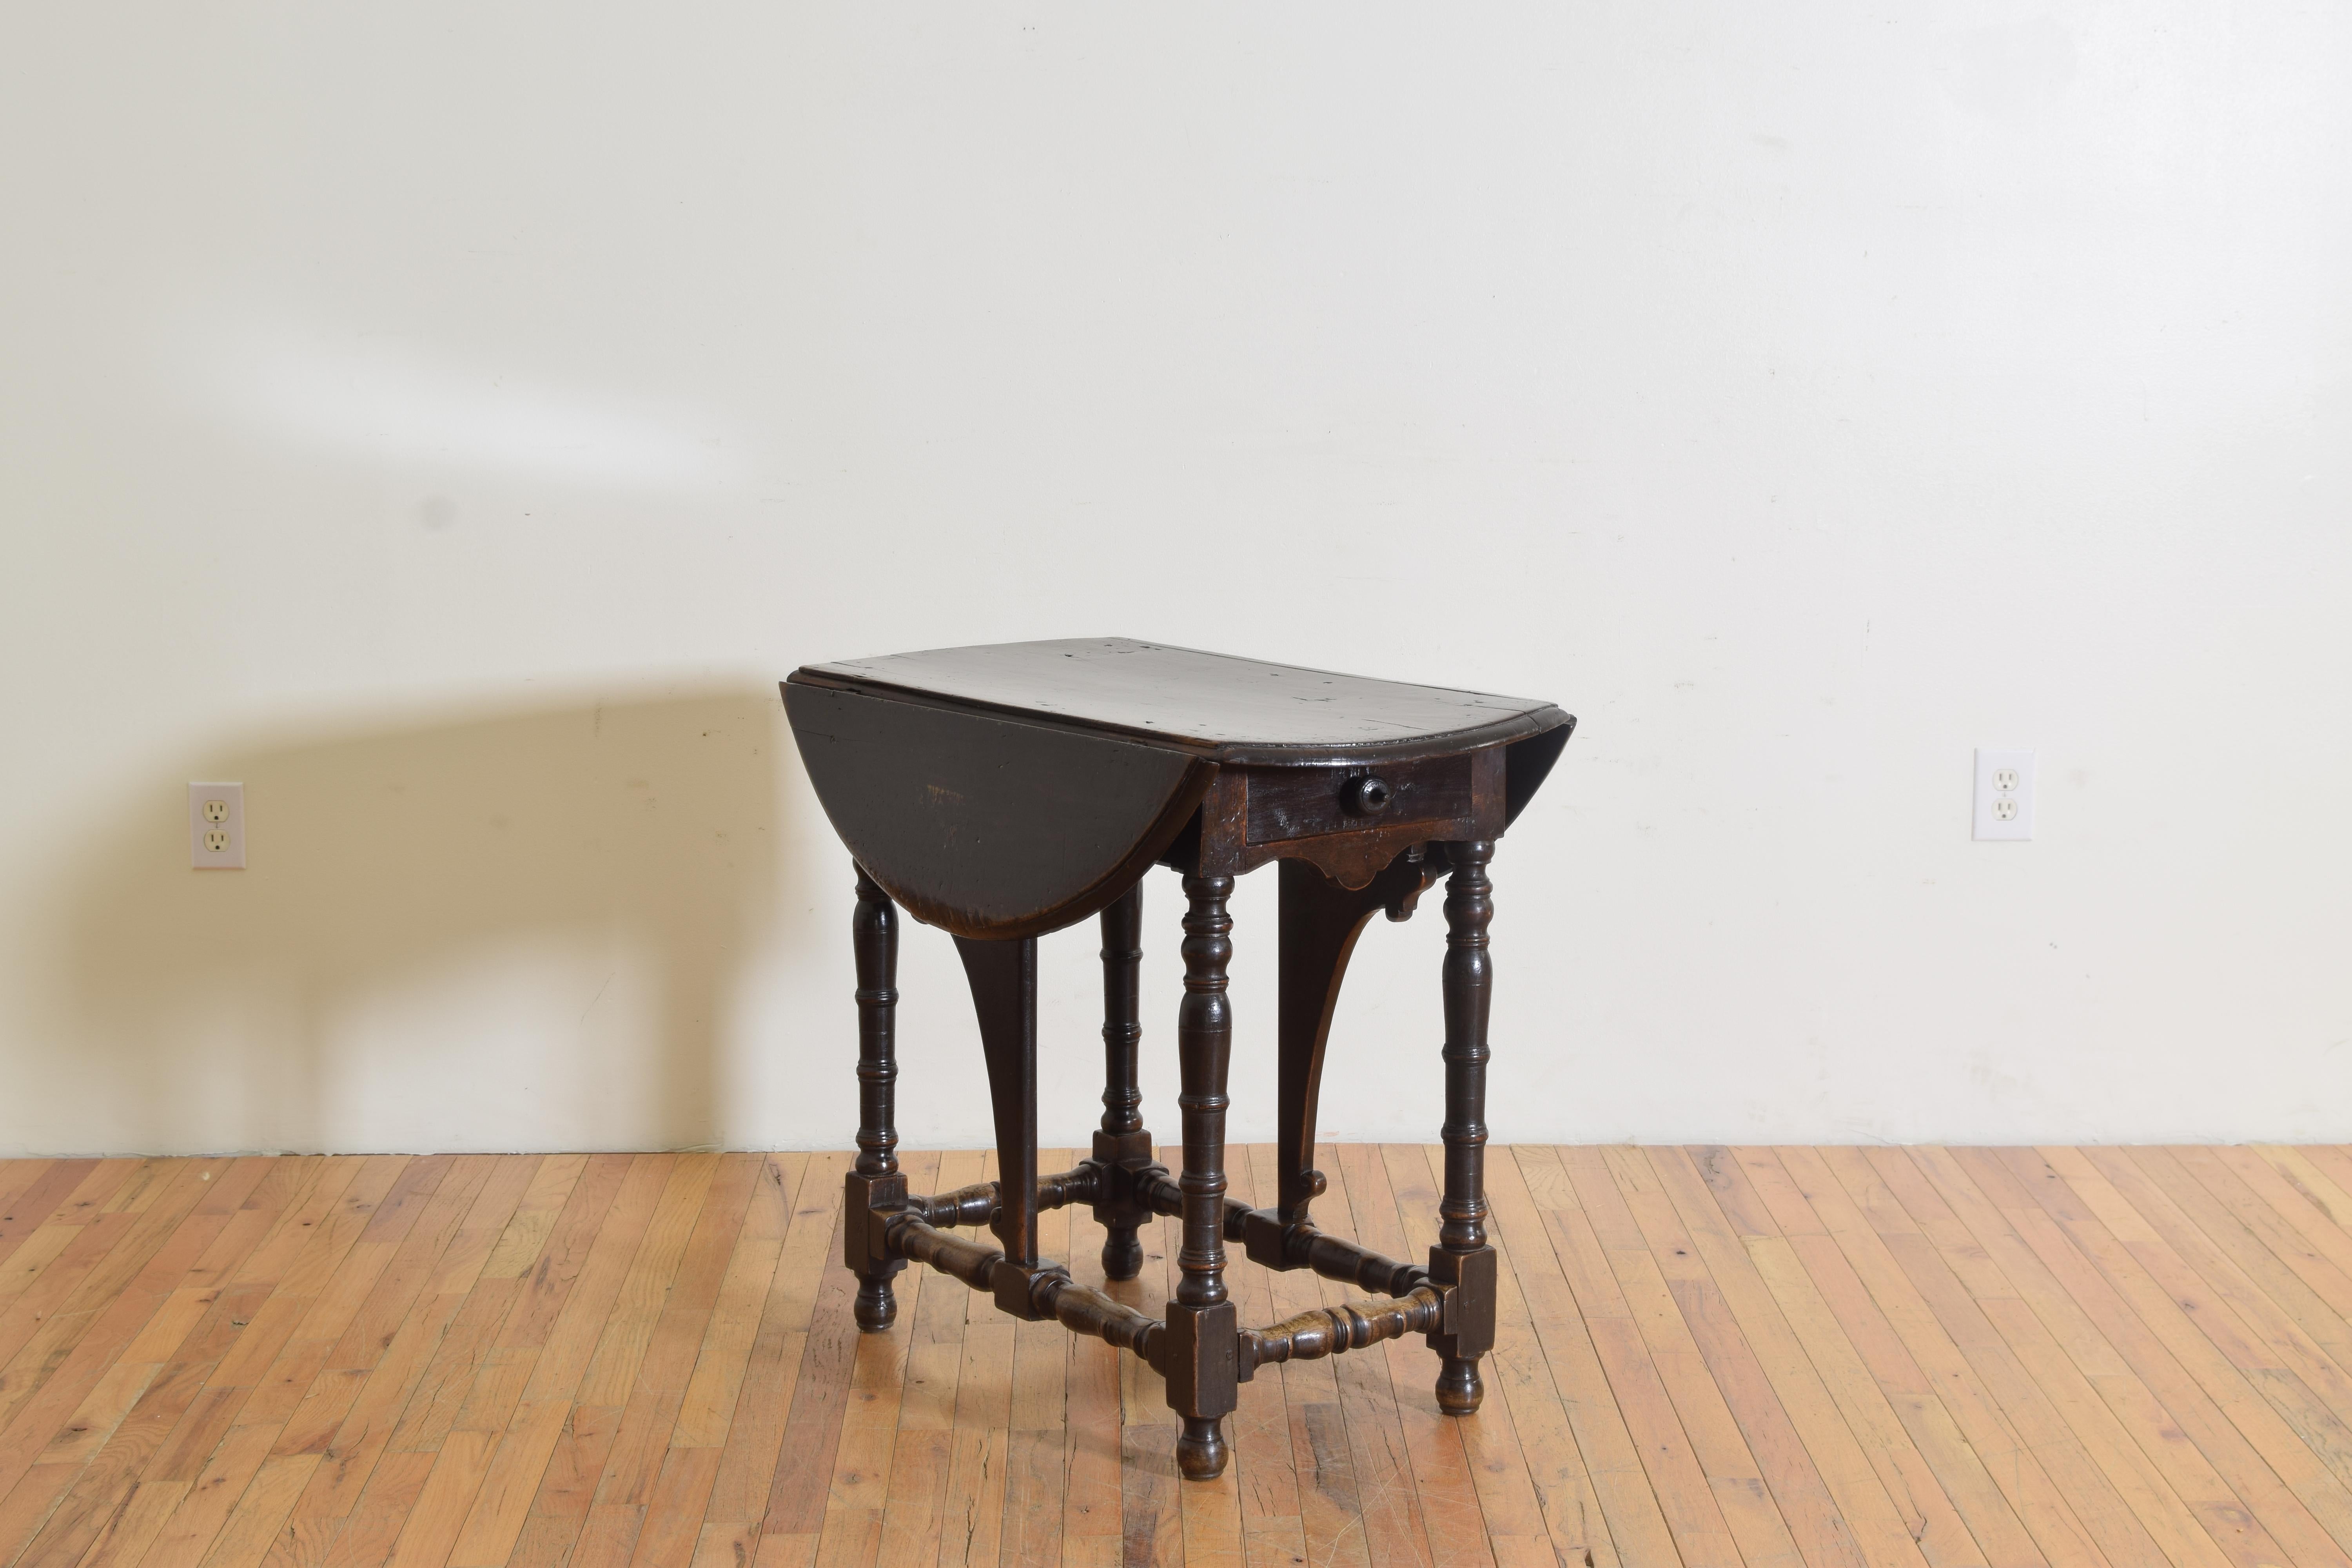 Italian Louis XIV Period Walnut Drop Leaf 1-Drawer Table, early 18th century In Good Condition For Sale In Atlanta, GA